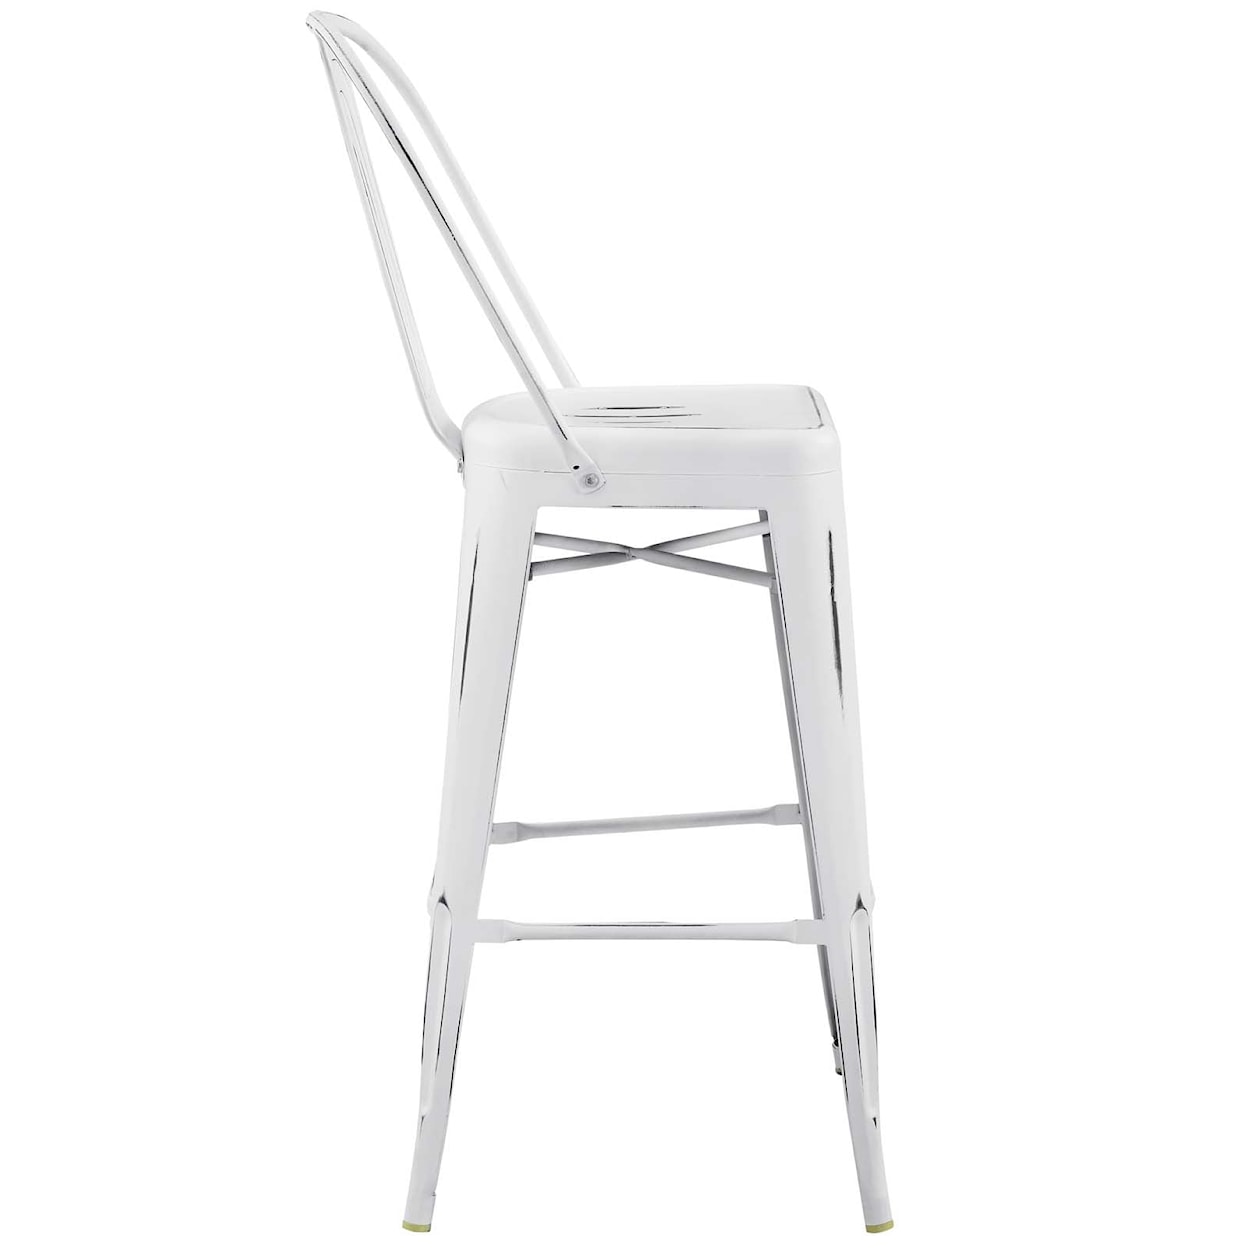 Modway Promenade Cafe and Bistro Style Bar Stool